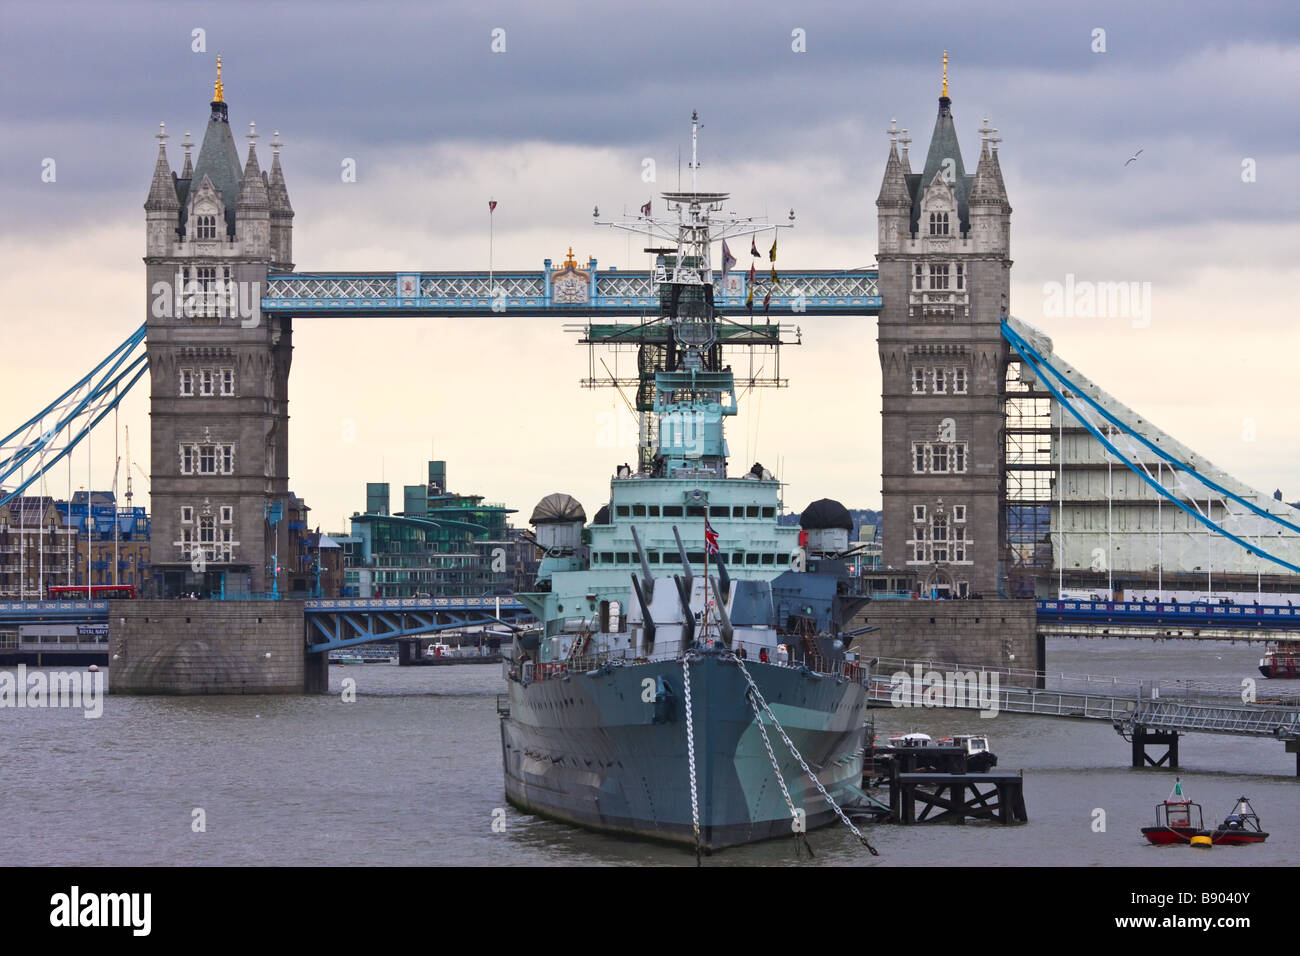 HMS Belfast warship in front of the London Tower Bridge Stock Photo